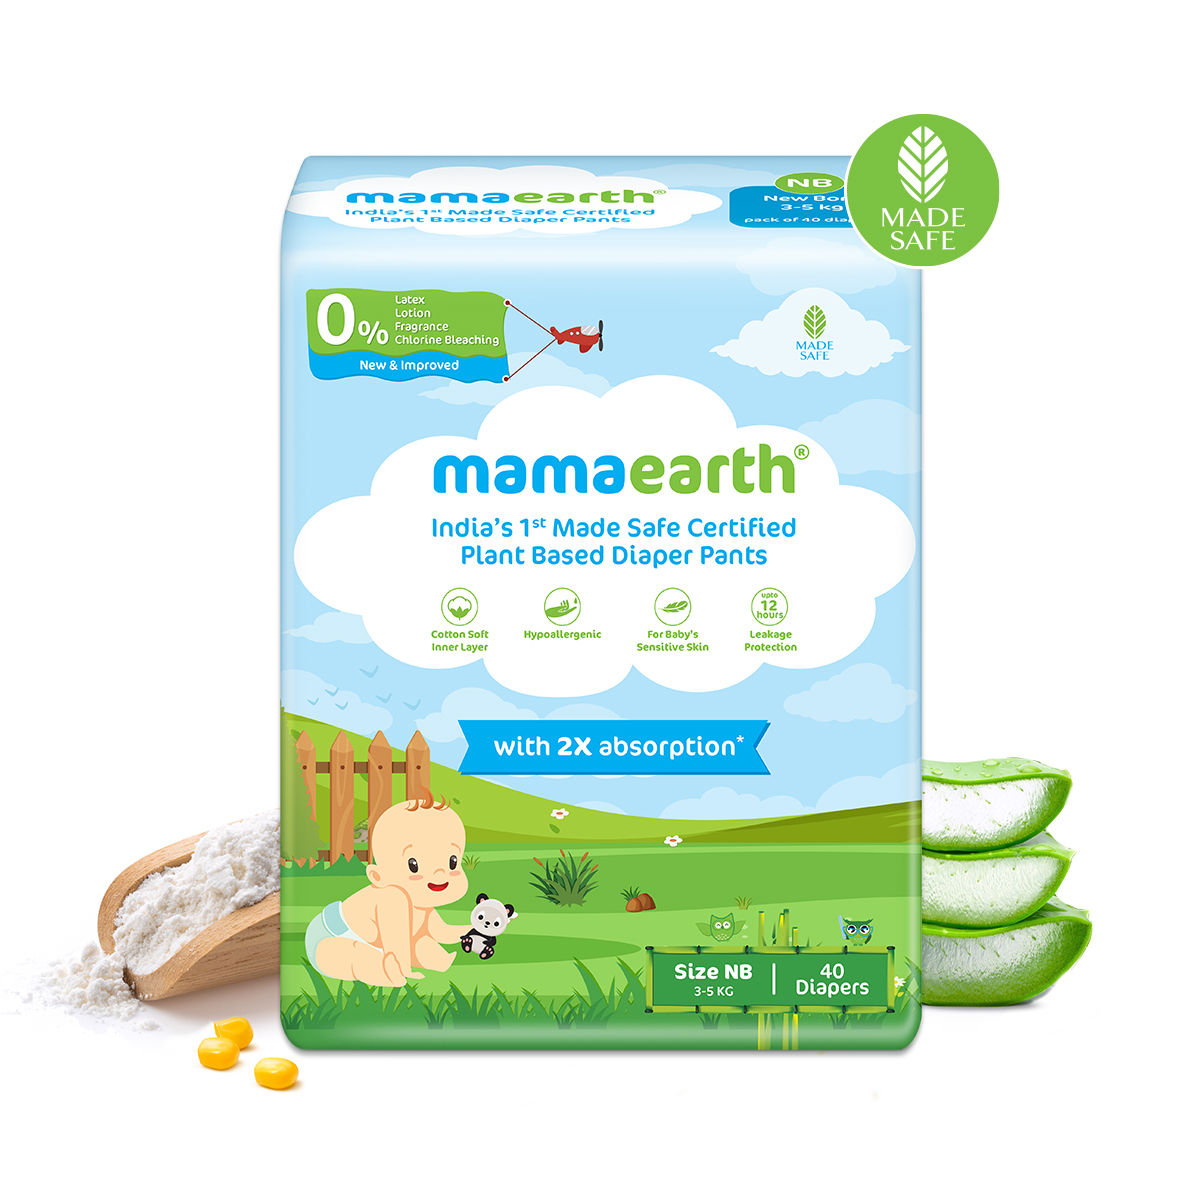 Mamaearth Plant-based Diaper Pants For Babies - 3-5 Kg (size Nb - 40 Diapers)